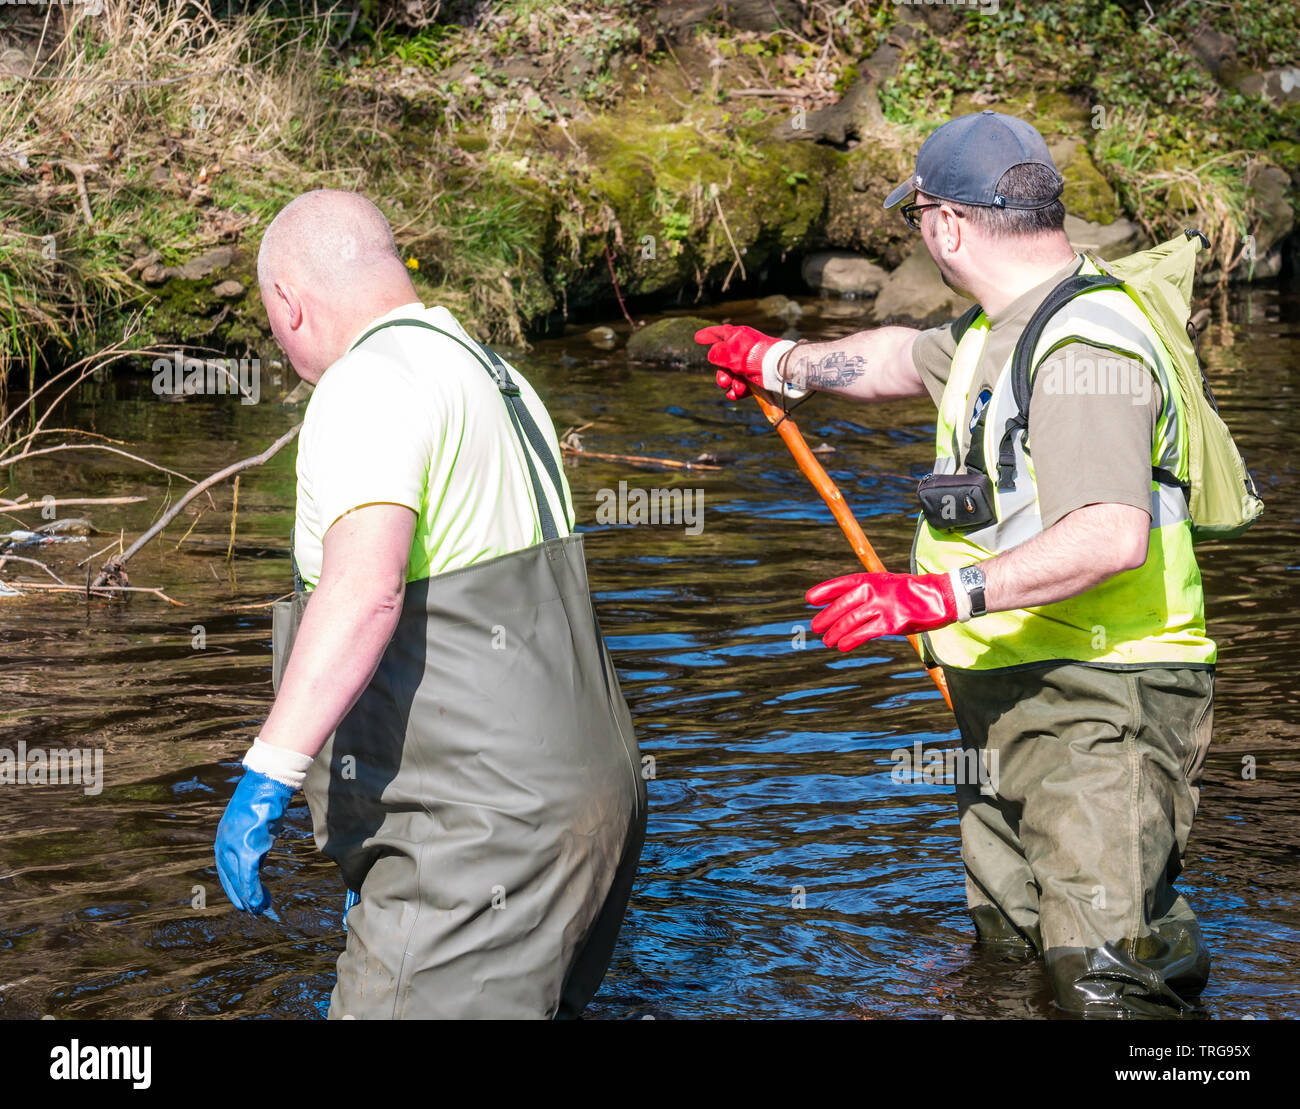 https://c8.alamy.com/comp/TRG95X/volunteer-at-annual-spring-clean-on-bank-of-water-of-leith-edinburgh-scotland-uk-men-in-waders-pull-on-a-rope-to-retrieve-rubbish-TRG95X.jpg